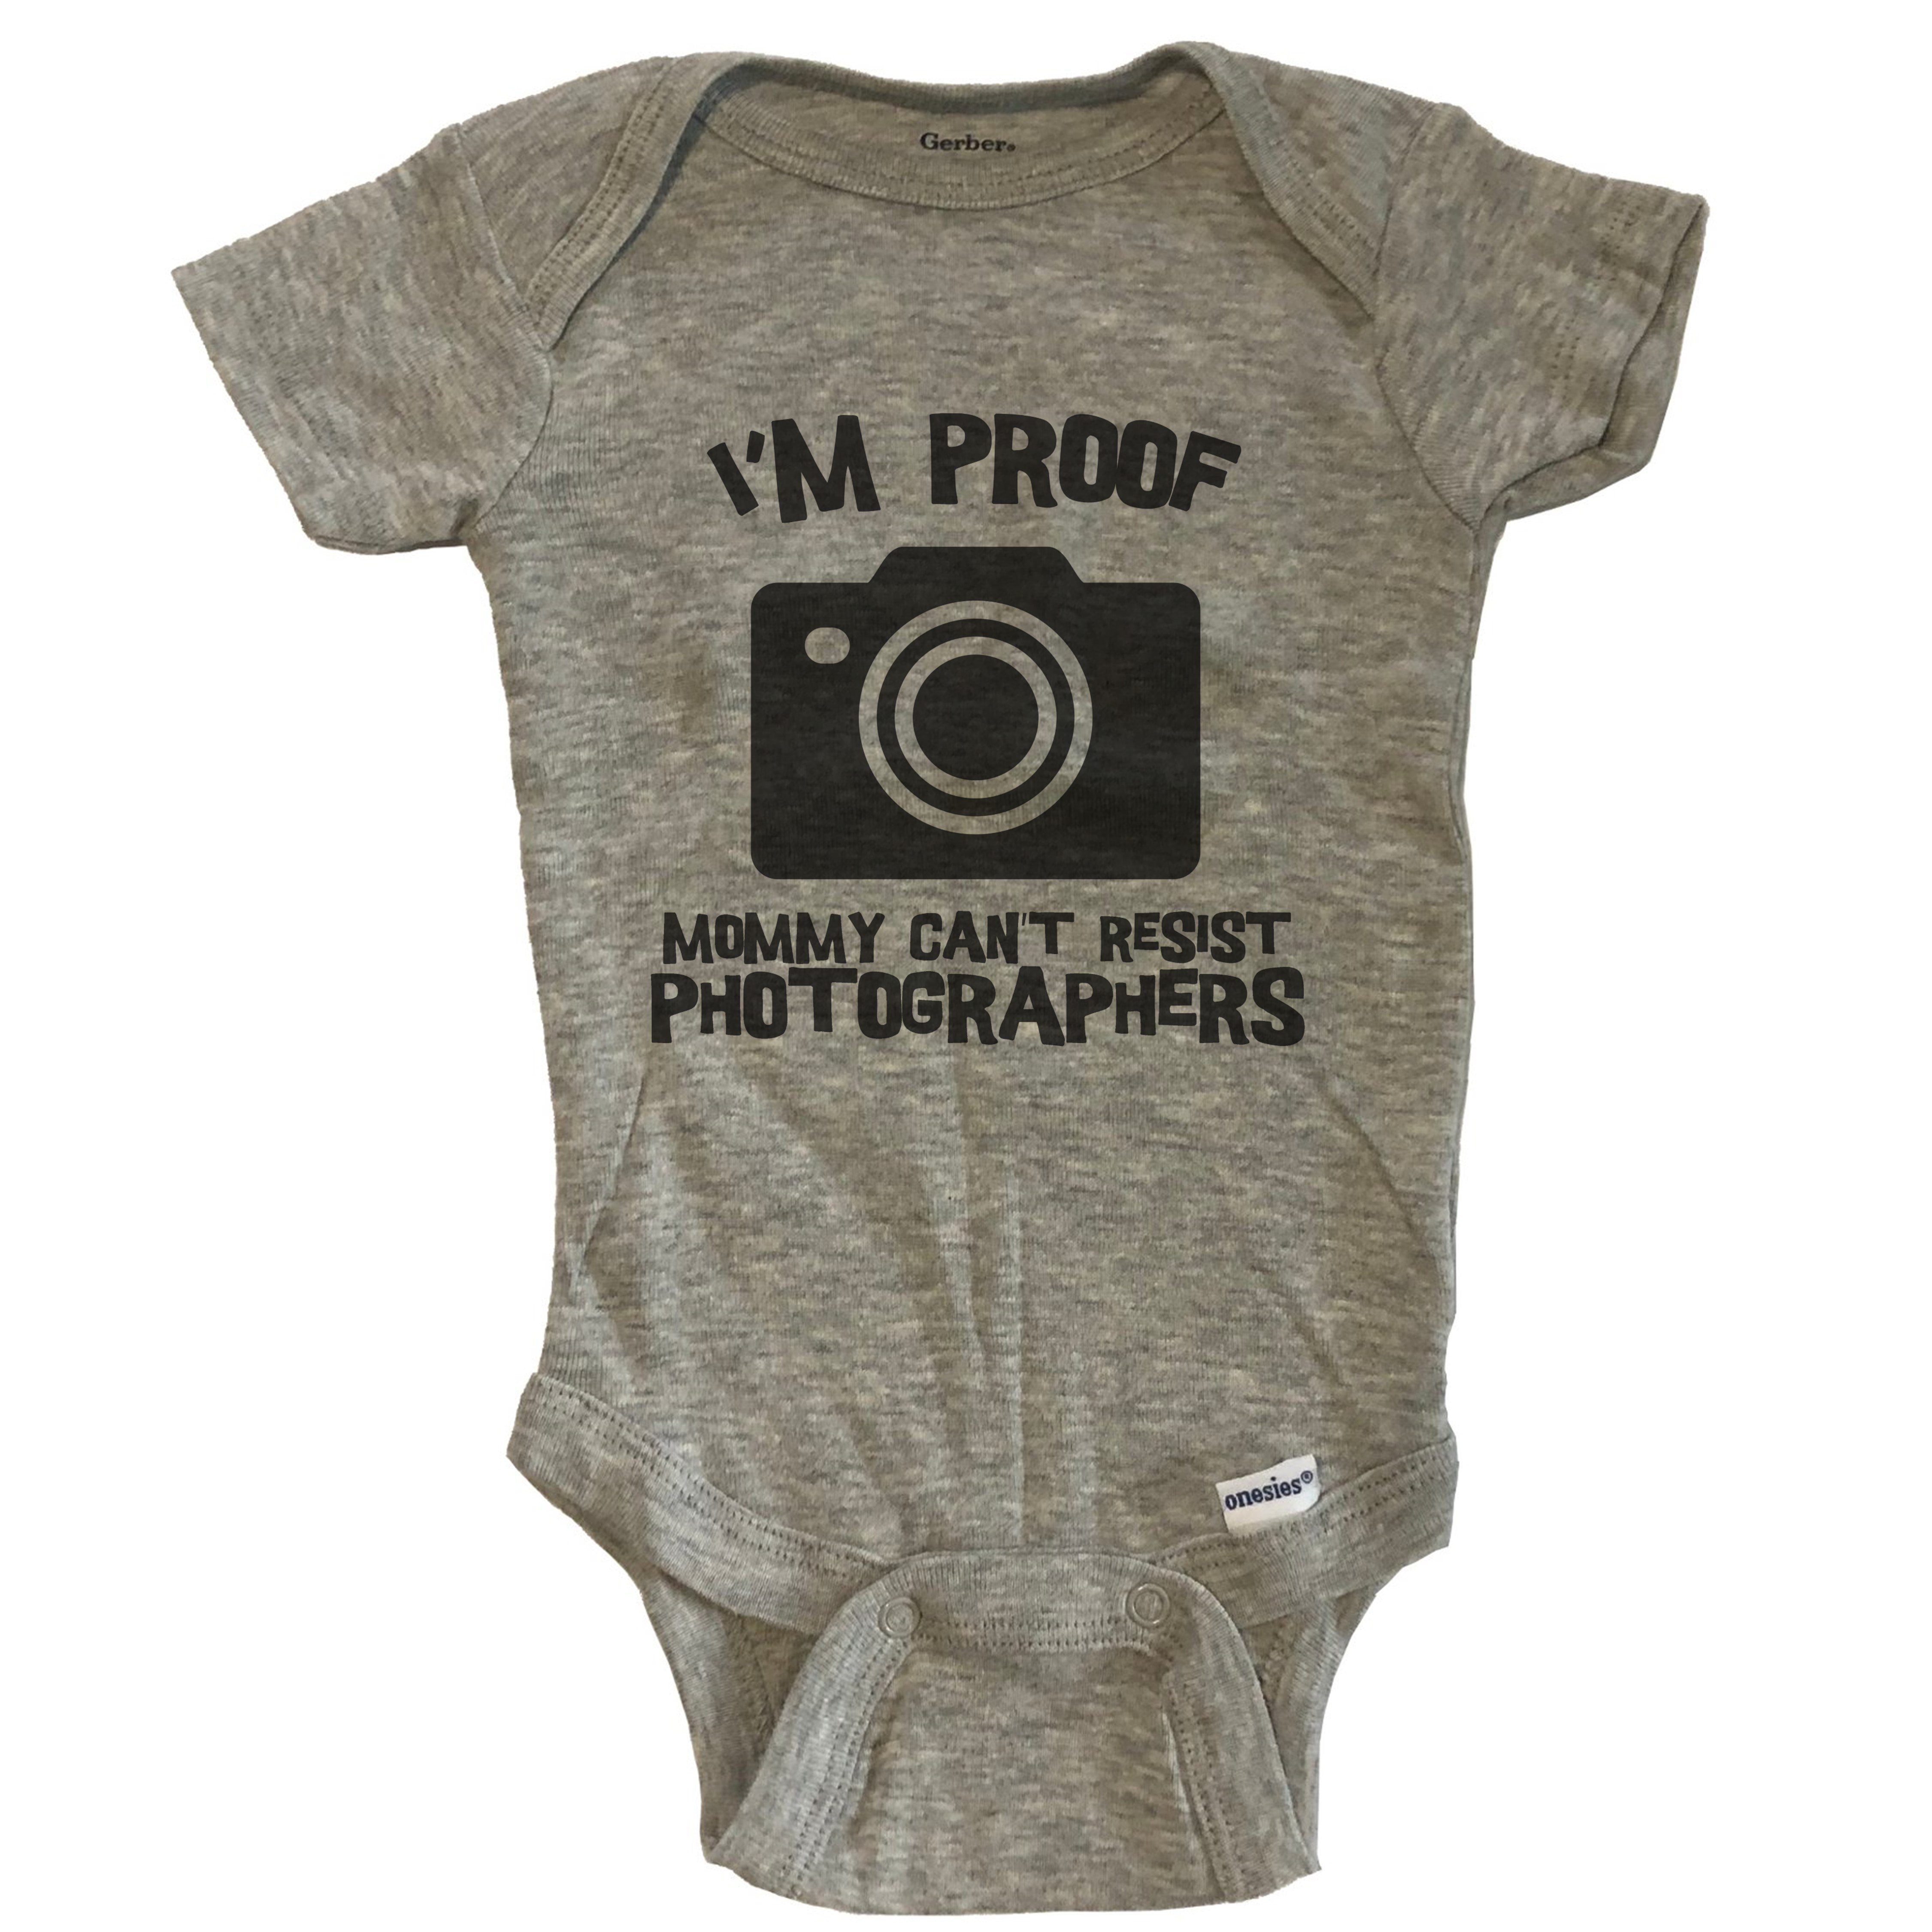 Im Proof That Mom Cant Resist Drummers Funny Band Onesie Bodysuit